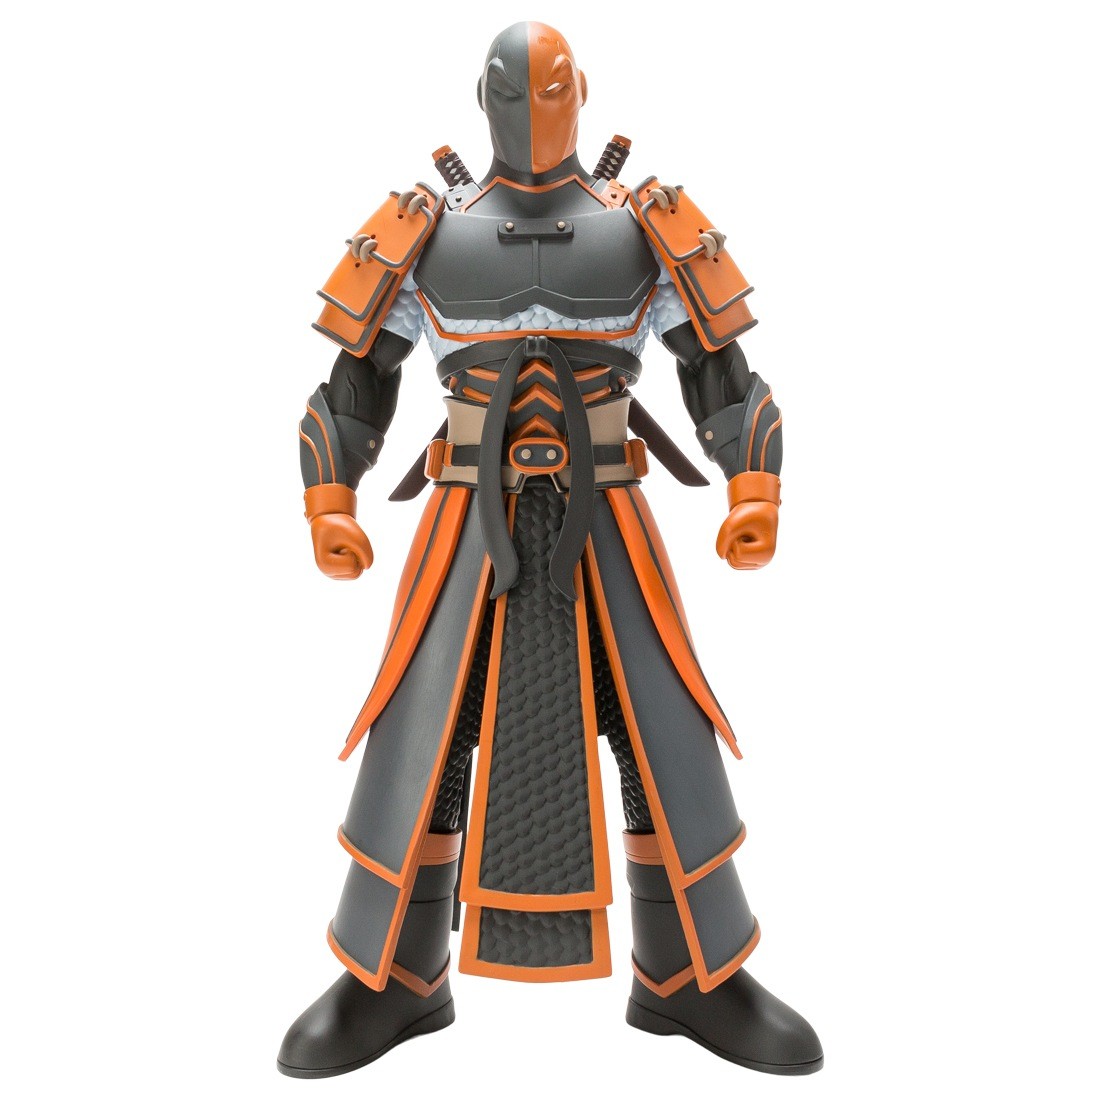 MINDstyle x DC x Imperial Palace 15 Inch Deathstroke Figure (gray)